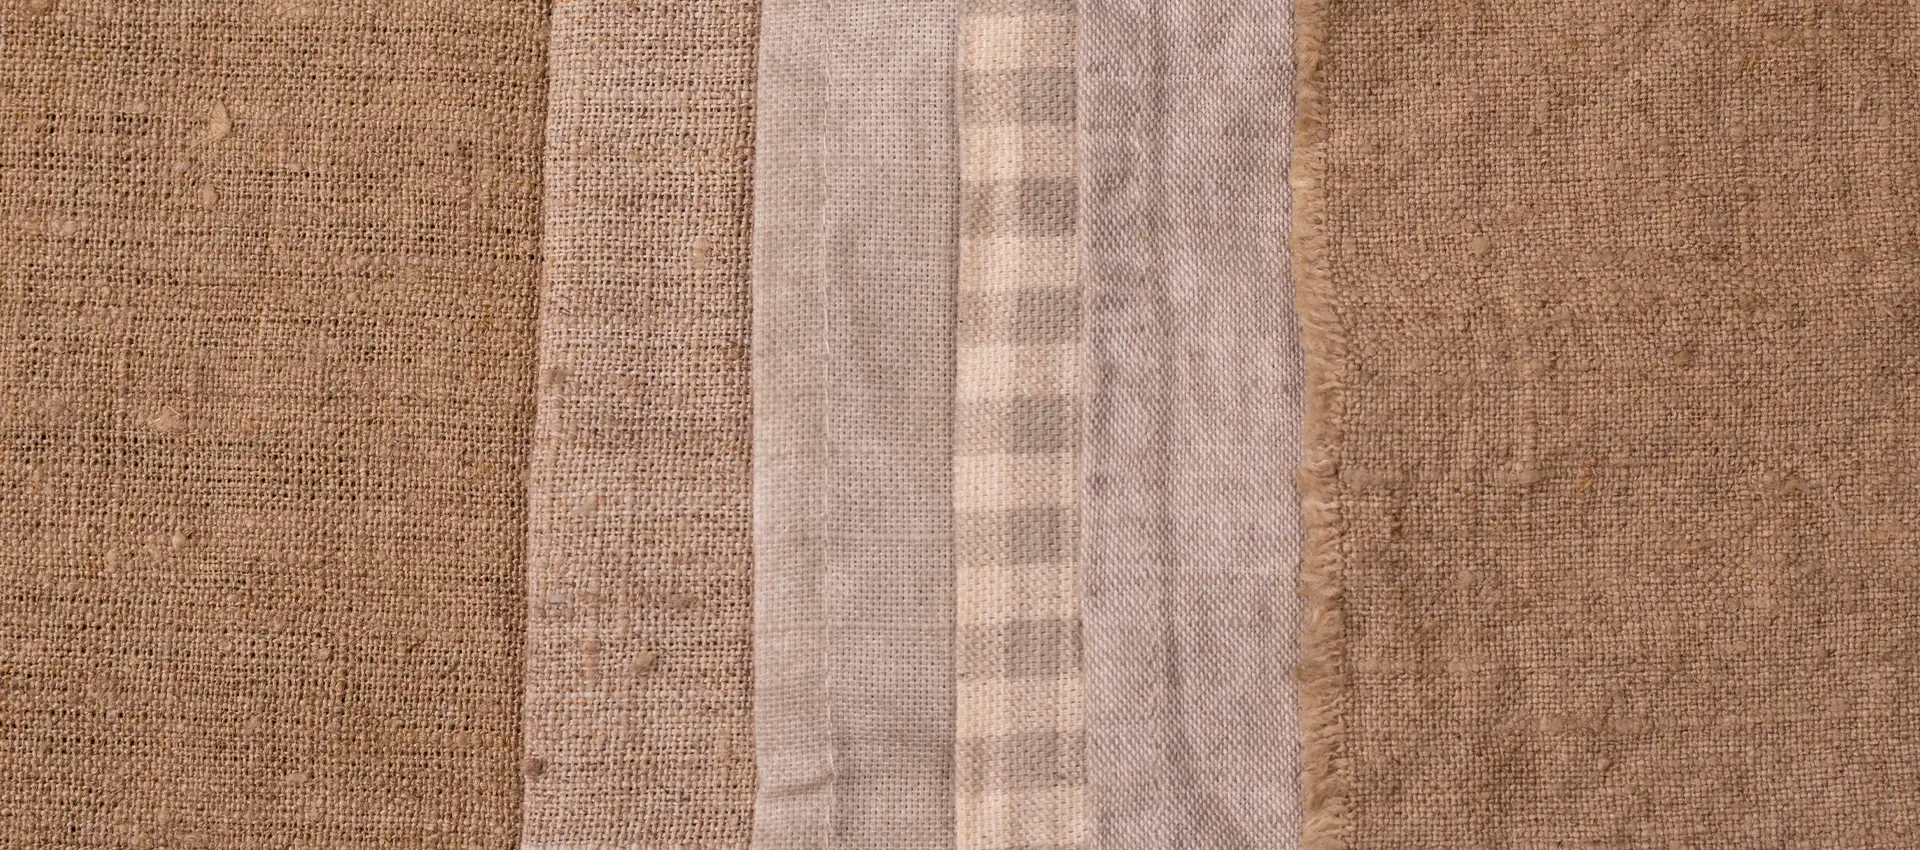 The History of Linen